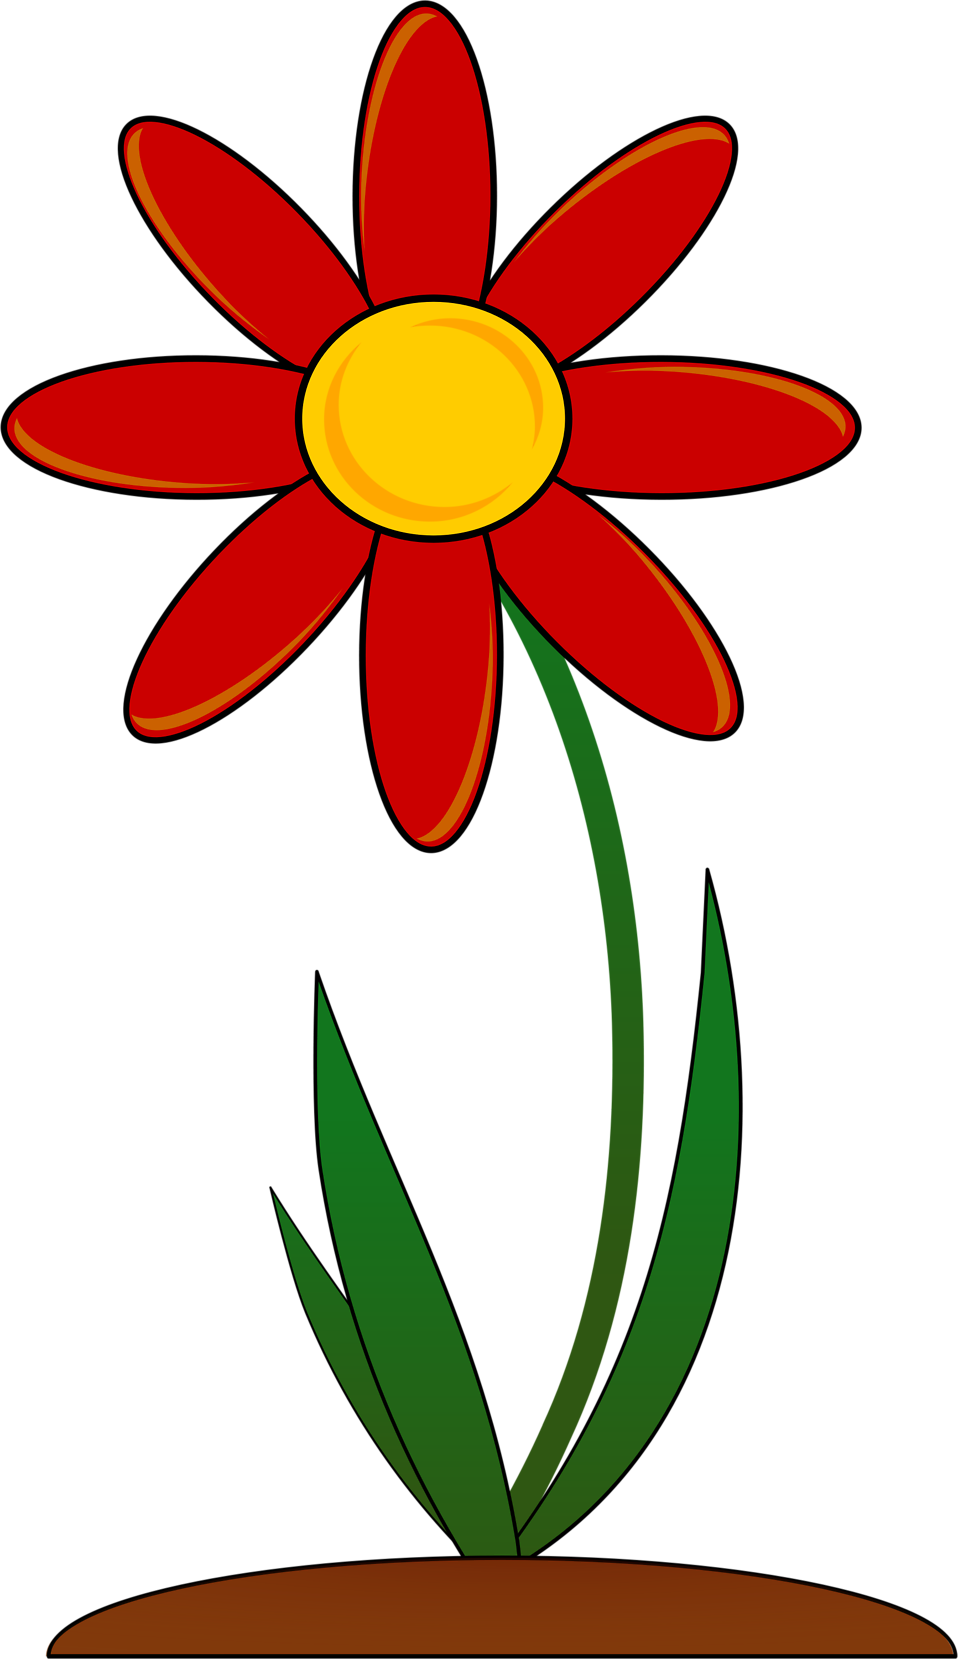 flower clipart with transparent background - photo #18